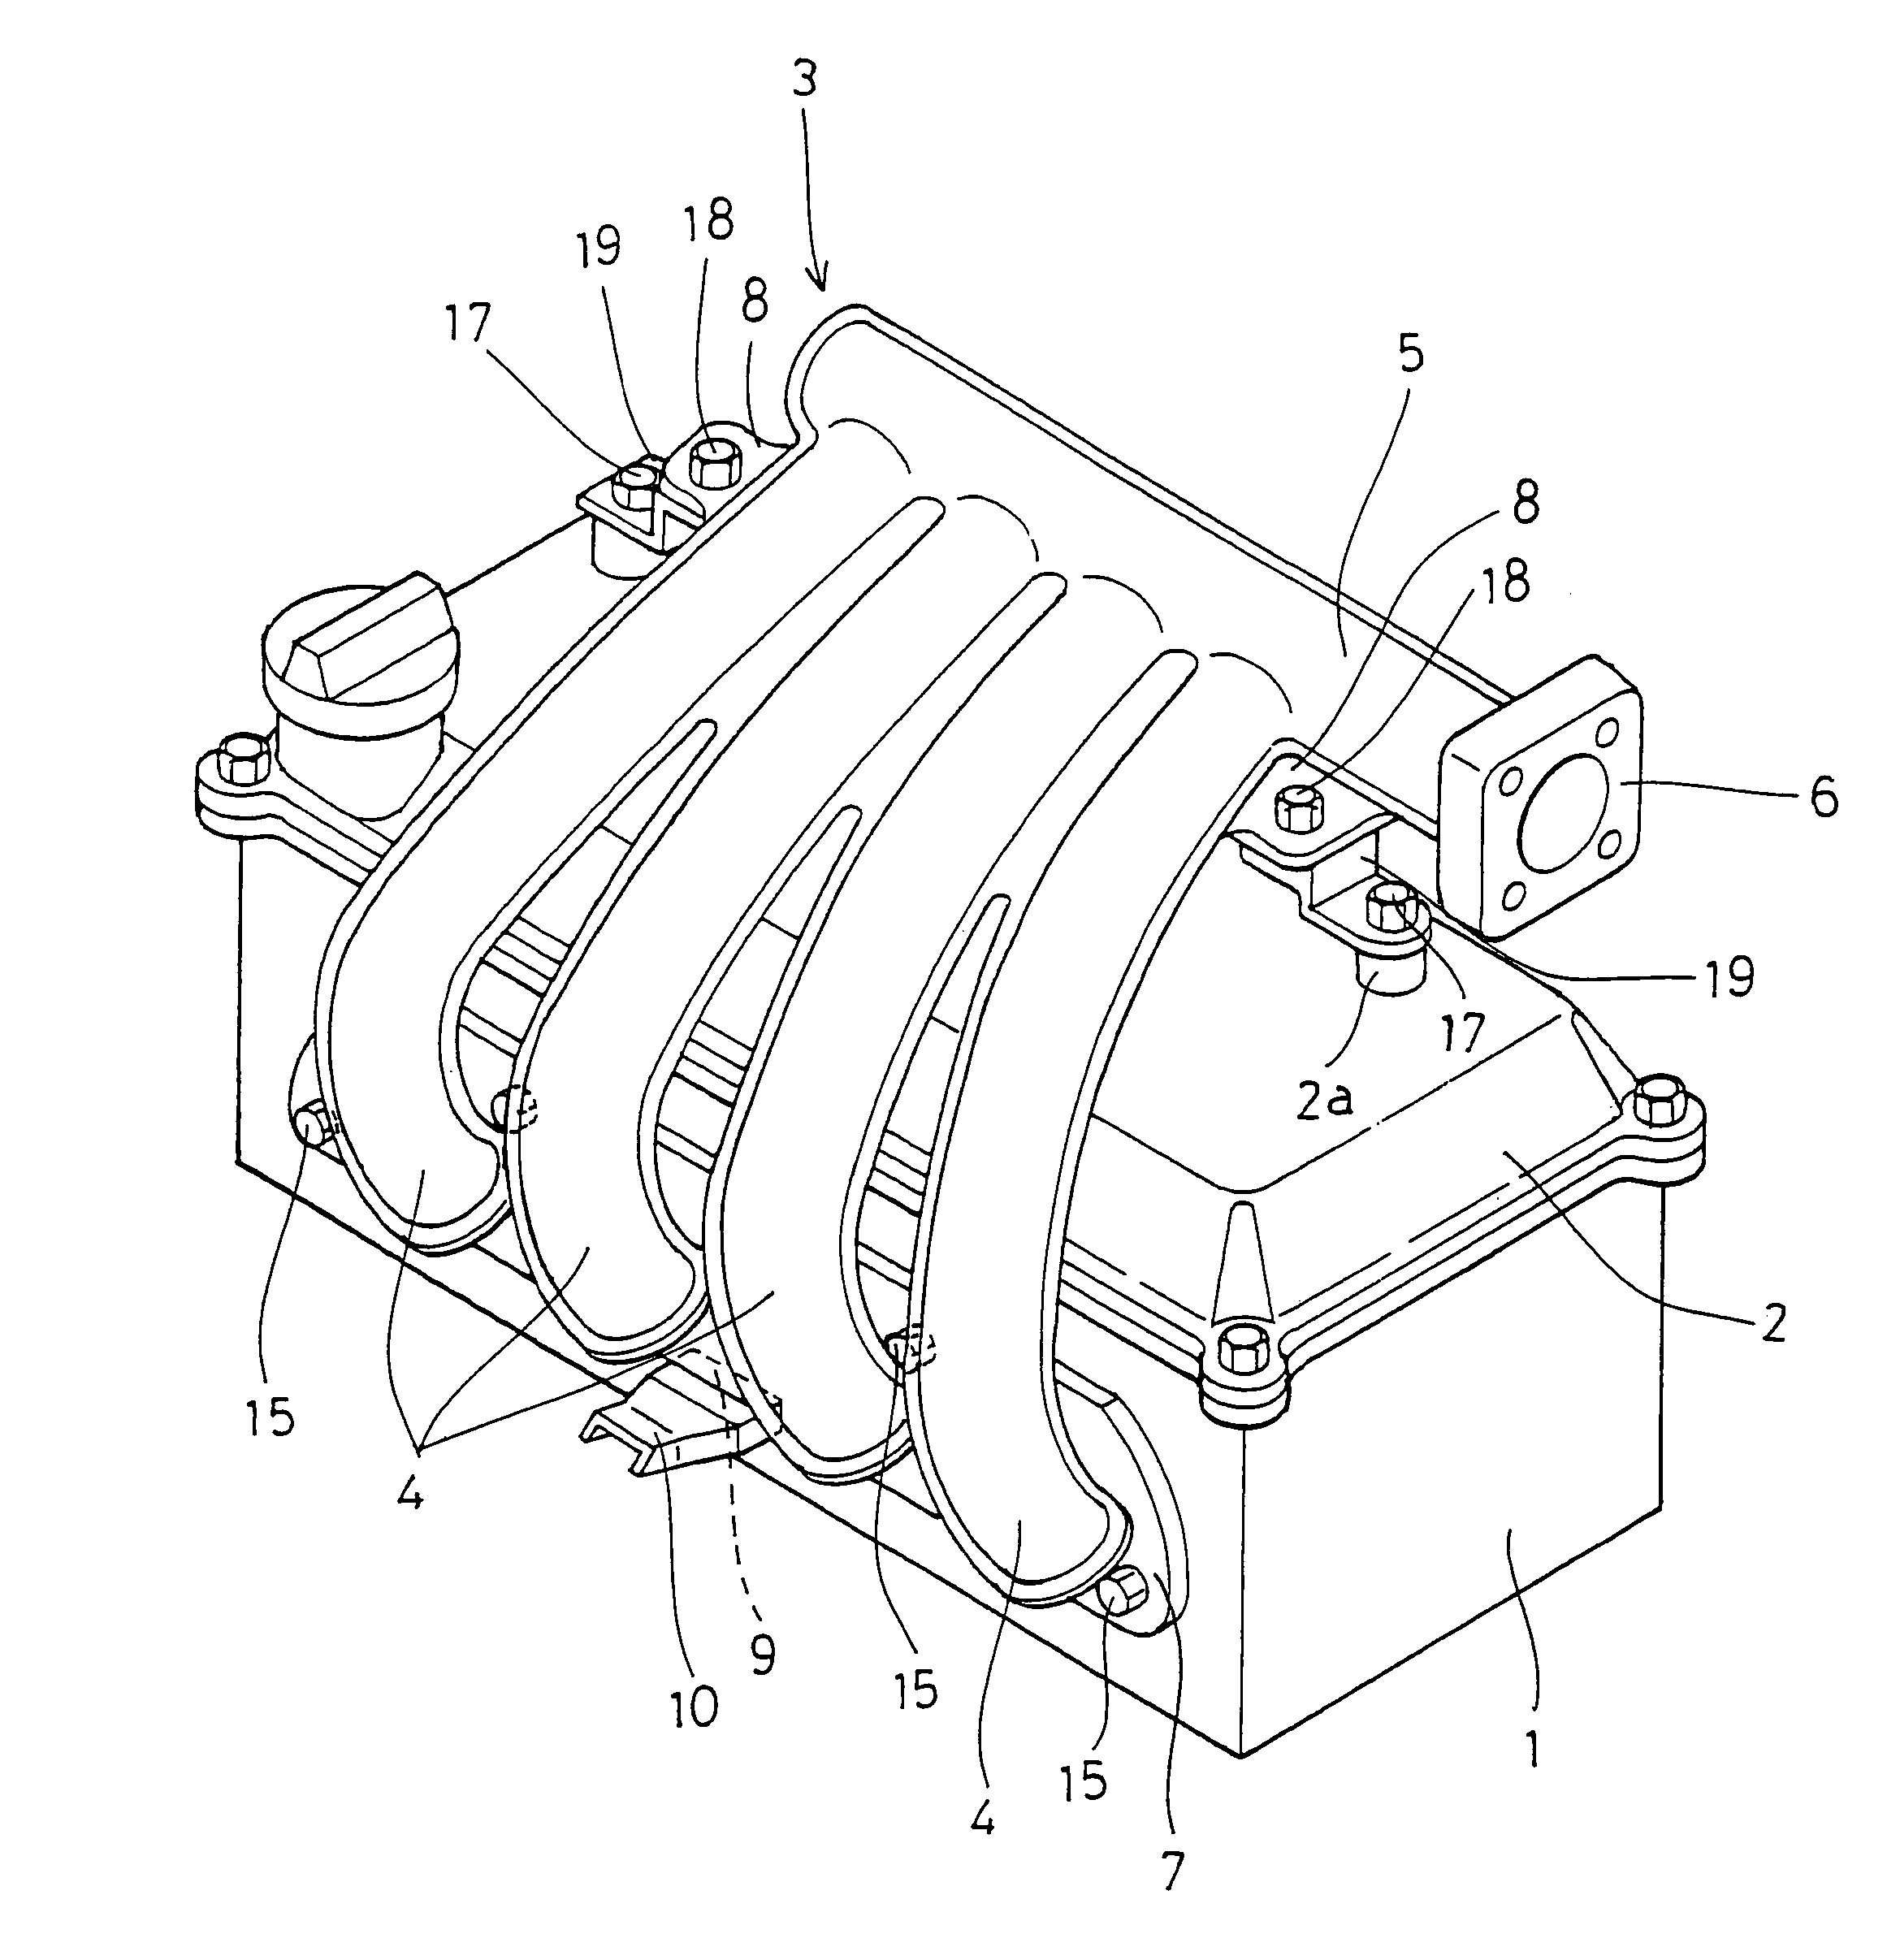 Installation structure of intake manifold